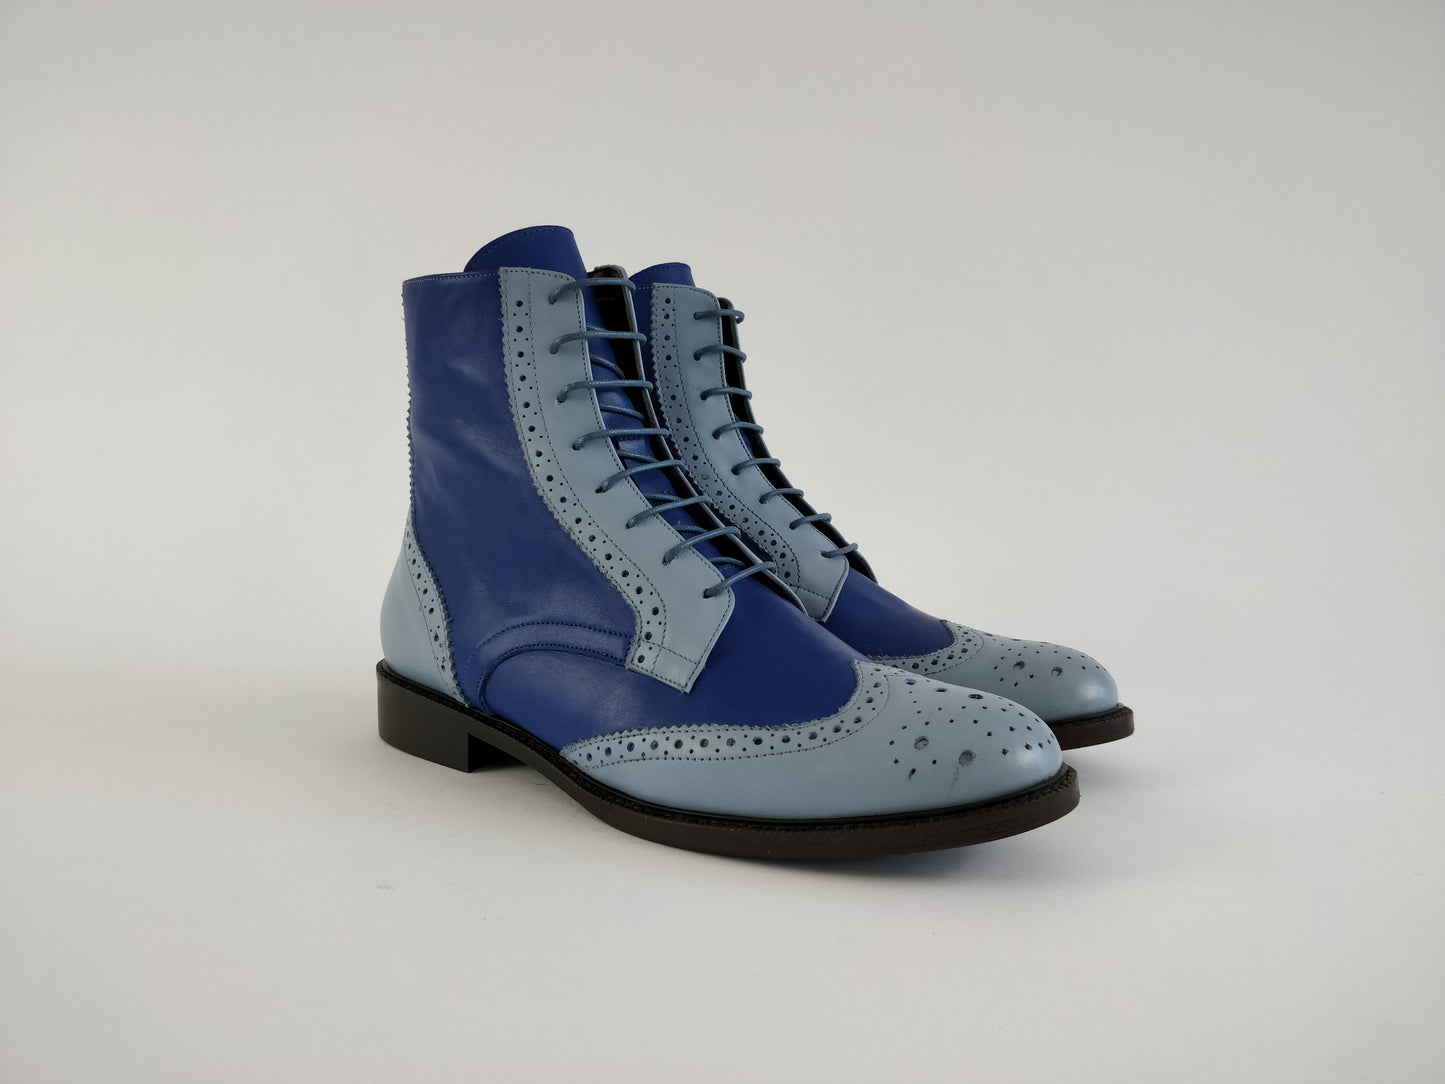 ITALIAN LEATHER ANKLEBOOTS women/Handmade Oxford Booties/Flat booties Italian Genuine Leather/Made In Italy/light blue boots,Royal Blue boot